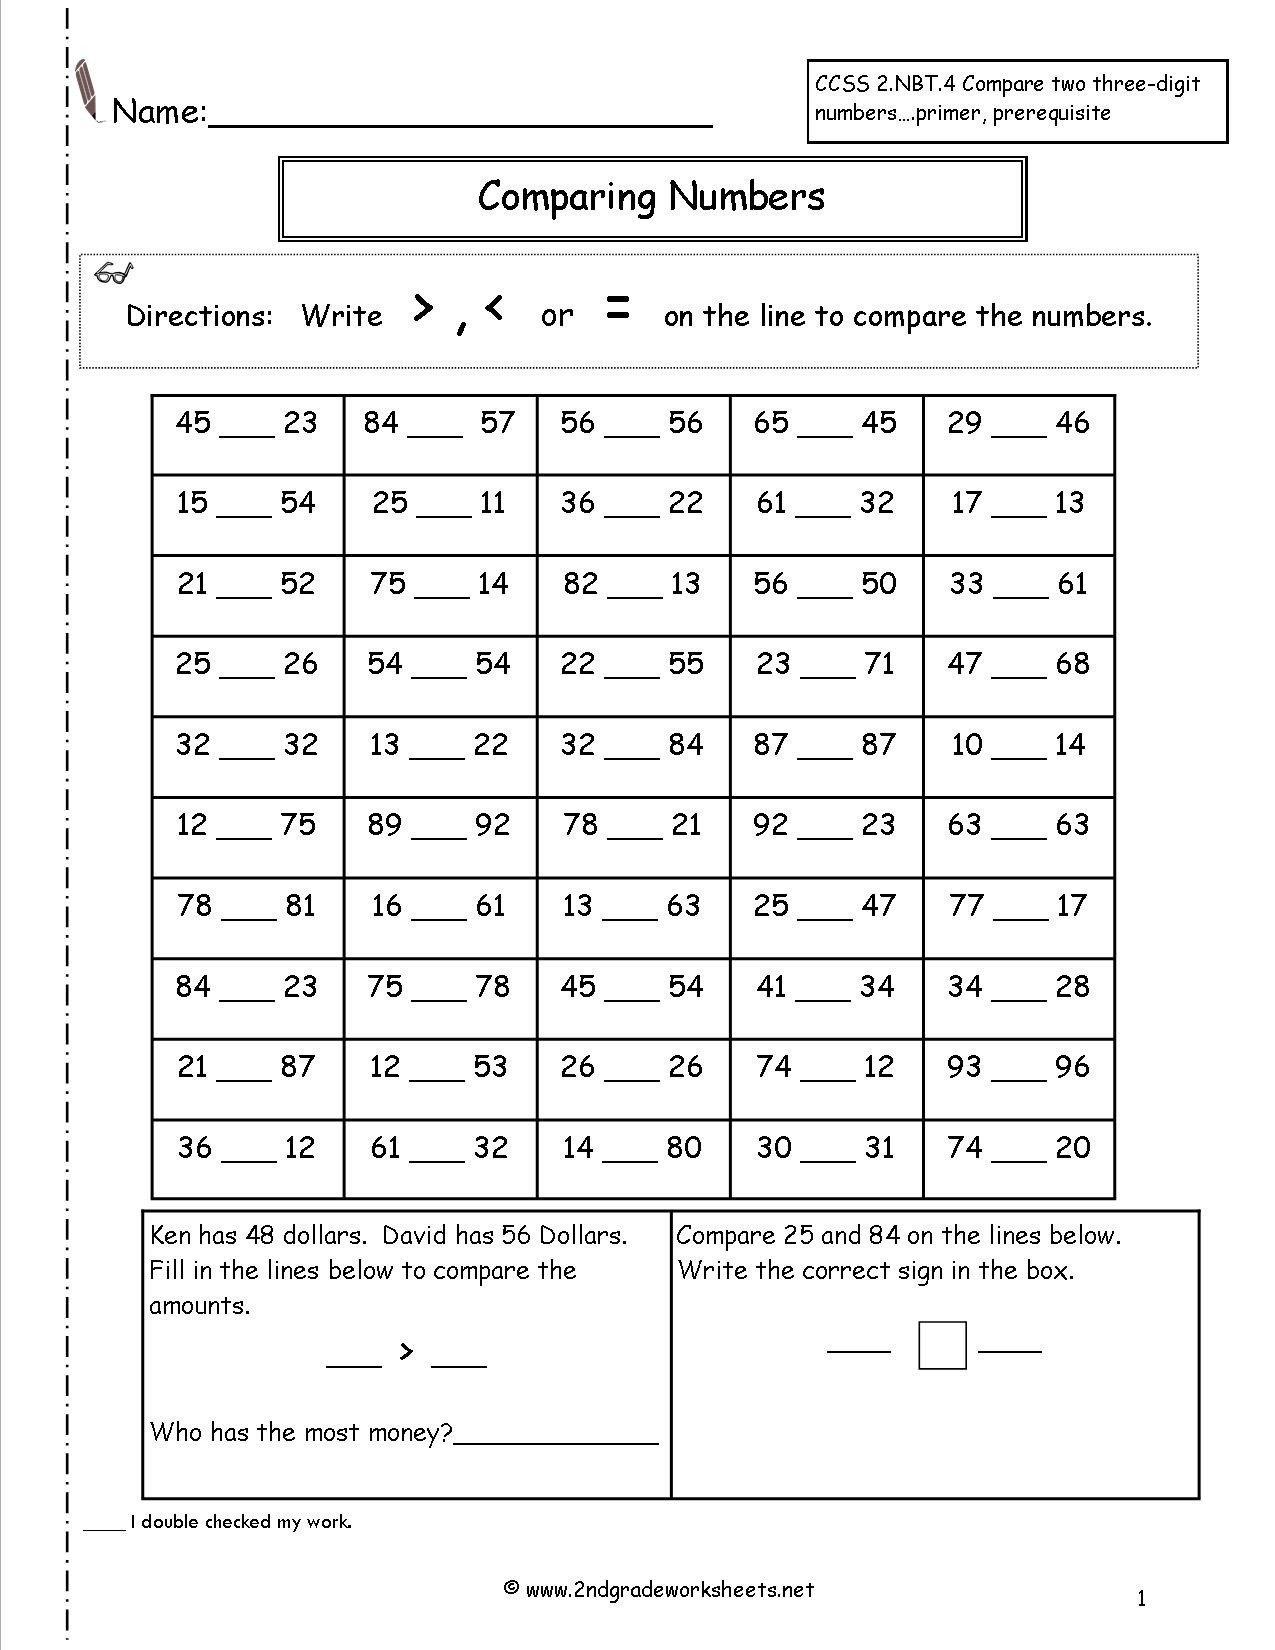 comparing-numbers-worksheets-4th-grade-db-excel